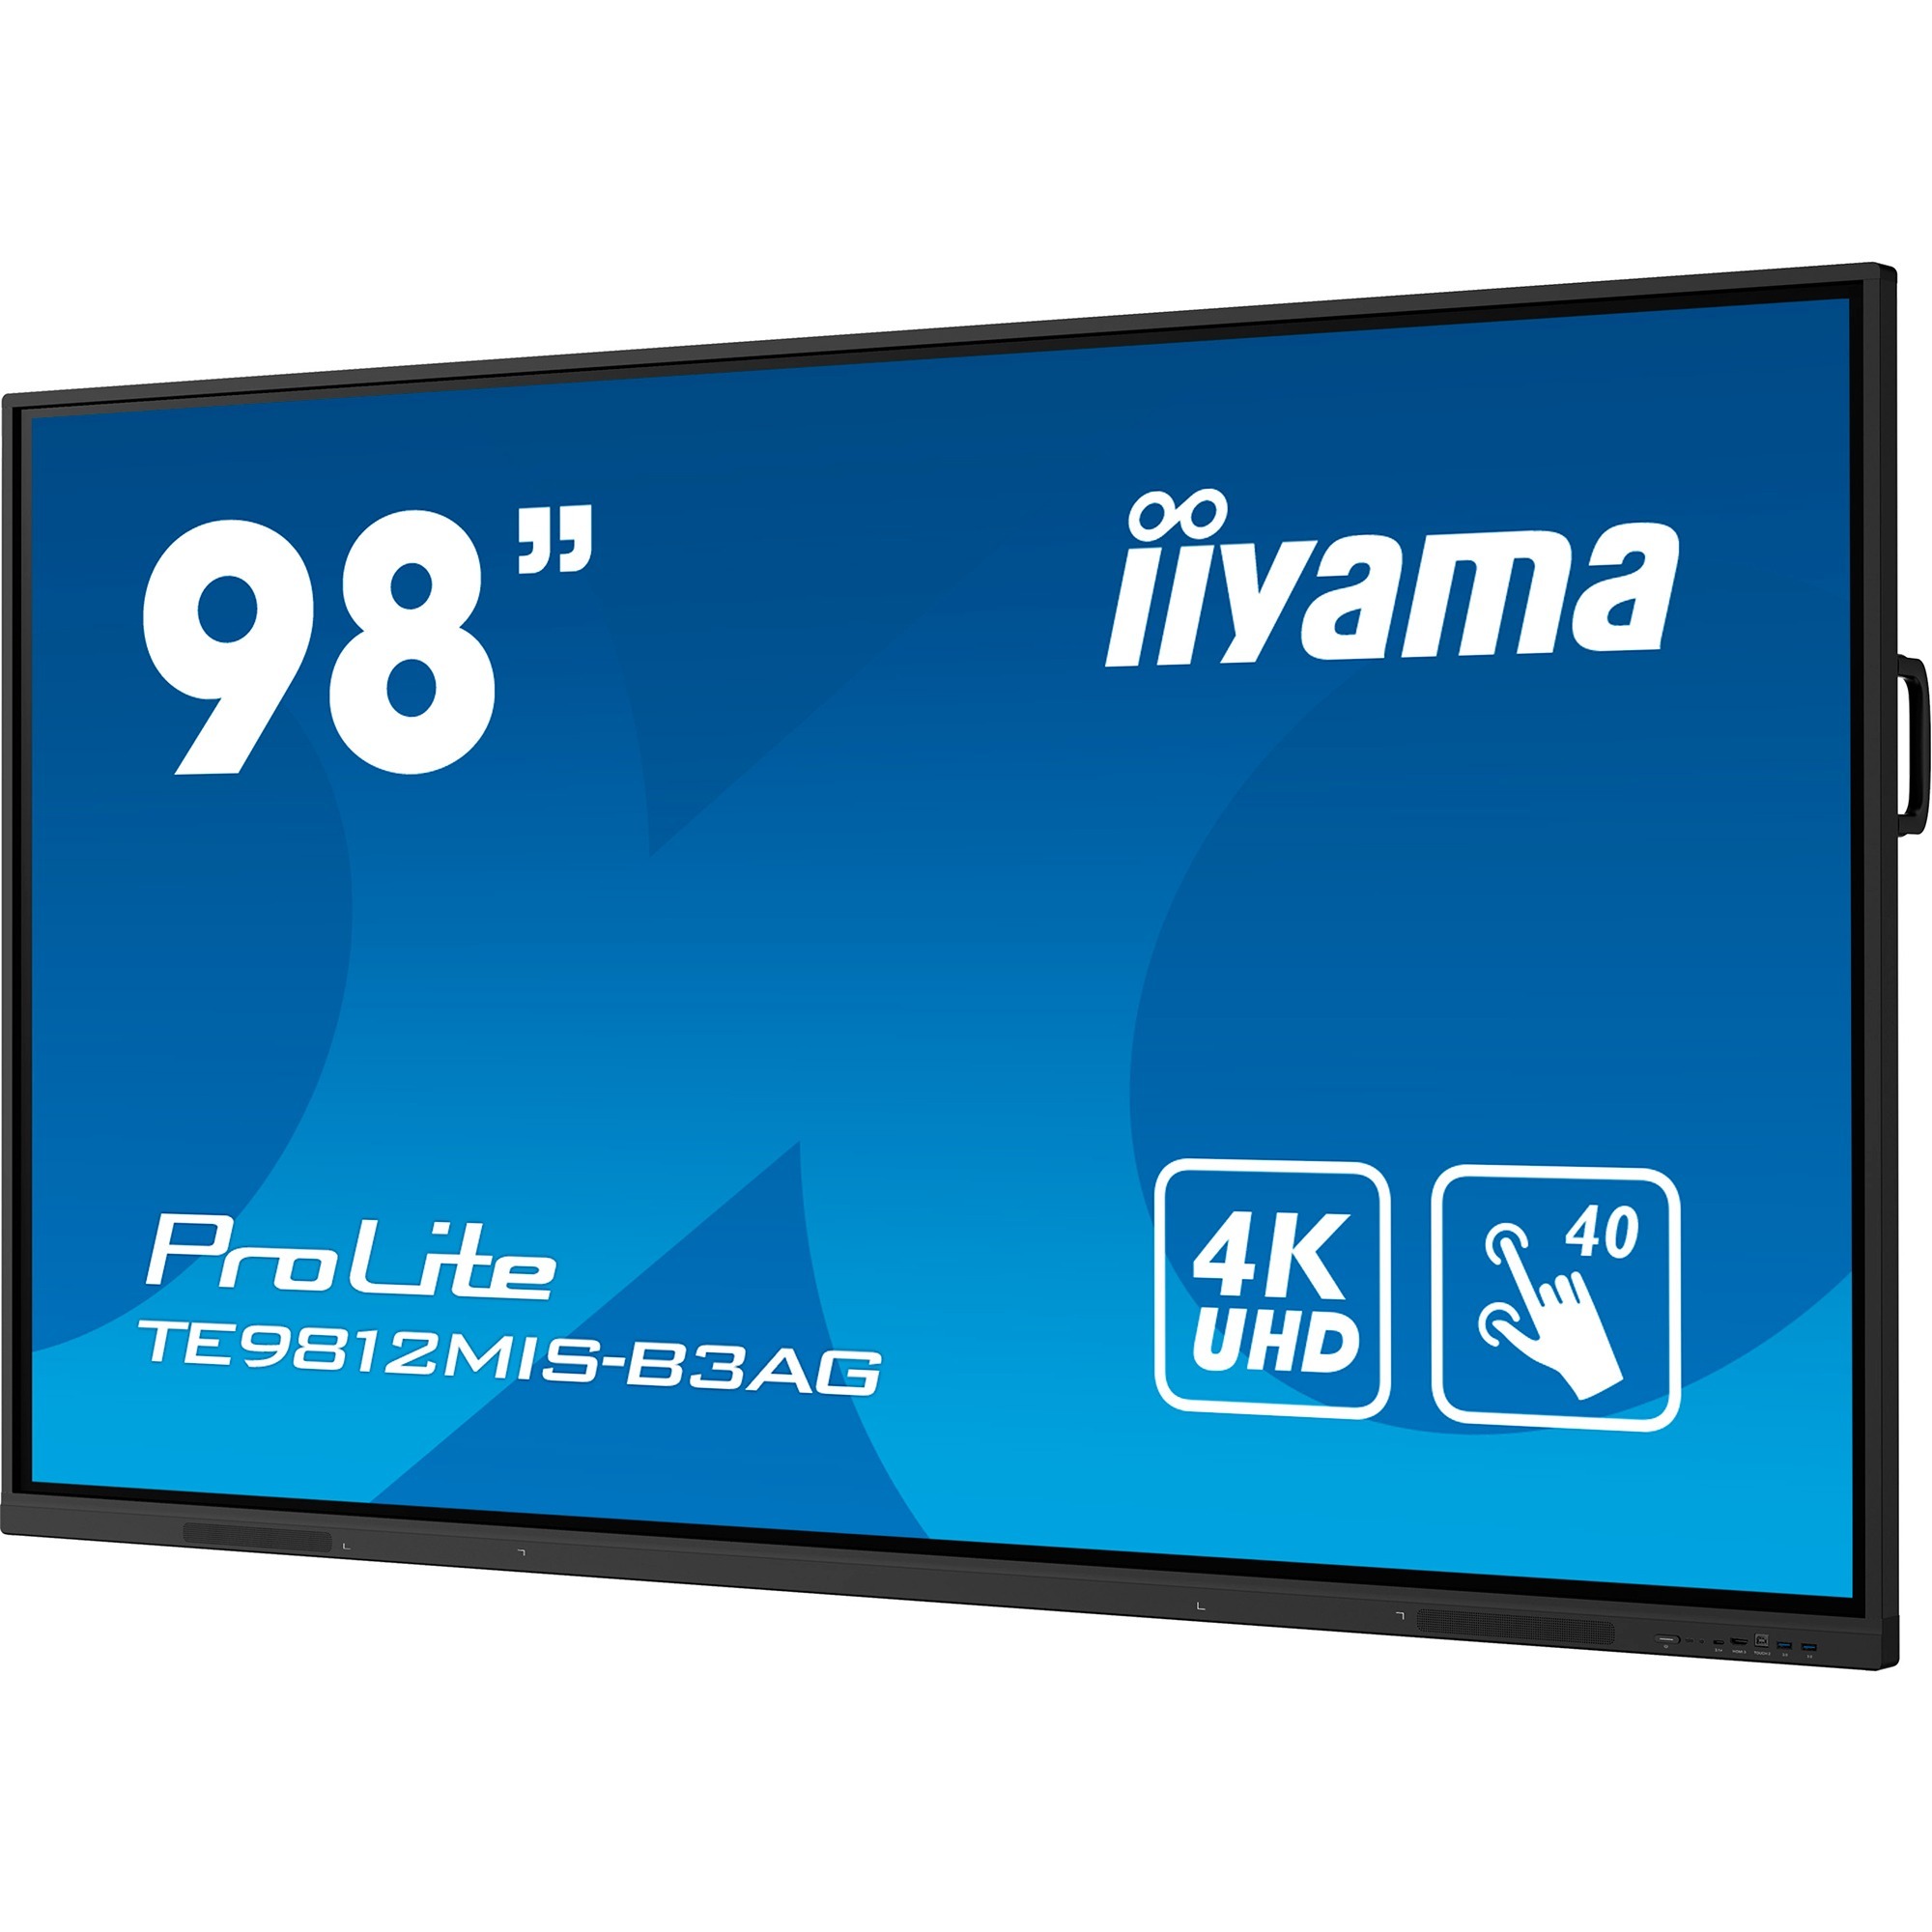 iiyama 98" iiWare10 , Android 11, 40-Points PureTouch IR with zero bonding, 3840x2160, UHD IPS panel, Metal Housing, Fan-less, Speakers 2x 16W front, VGA, HDMI 3x HDMI-out, USB-C with 65W PD (front), Audio mini-jack and Optical Out (S/PDIF), USB Touch Interface  [Energieklasse G] (TE9812MIS-B3AG)